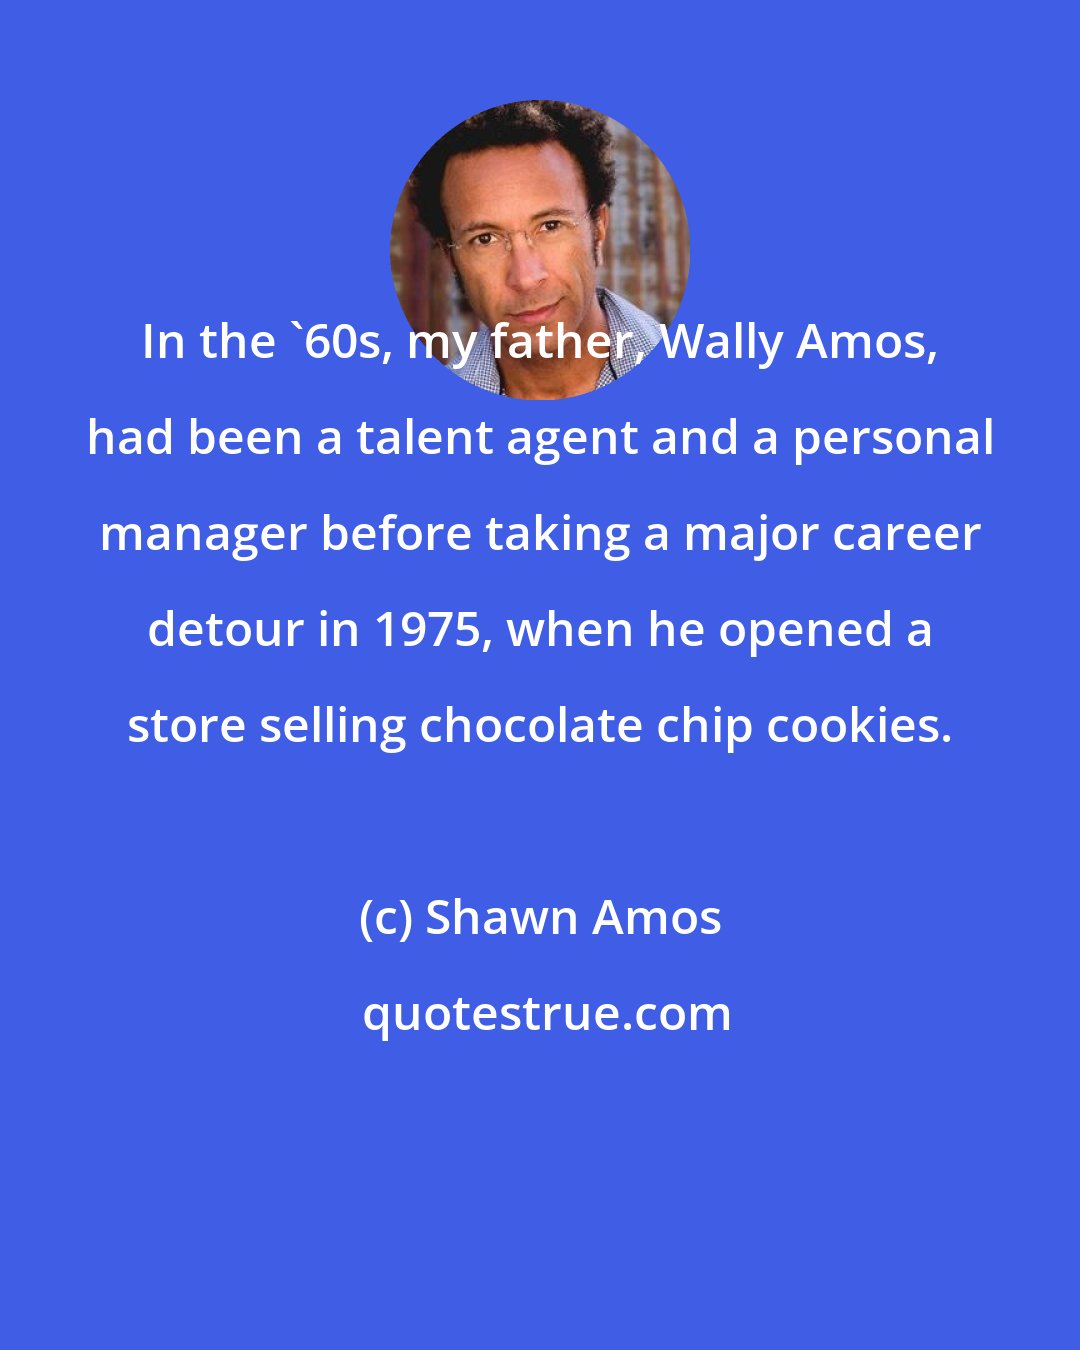 Shawn Amos: In the '60s, my father, Wally Amos, had been a talent agent and a personal manager before taking a major career detour in 1975, when he opened a store selling chocolate chip cookies.